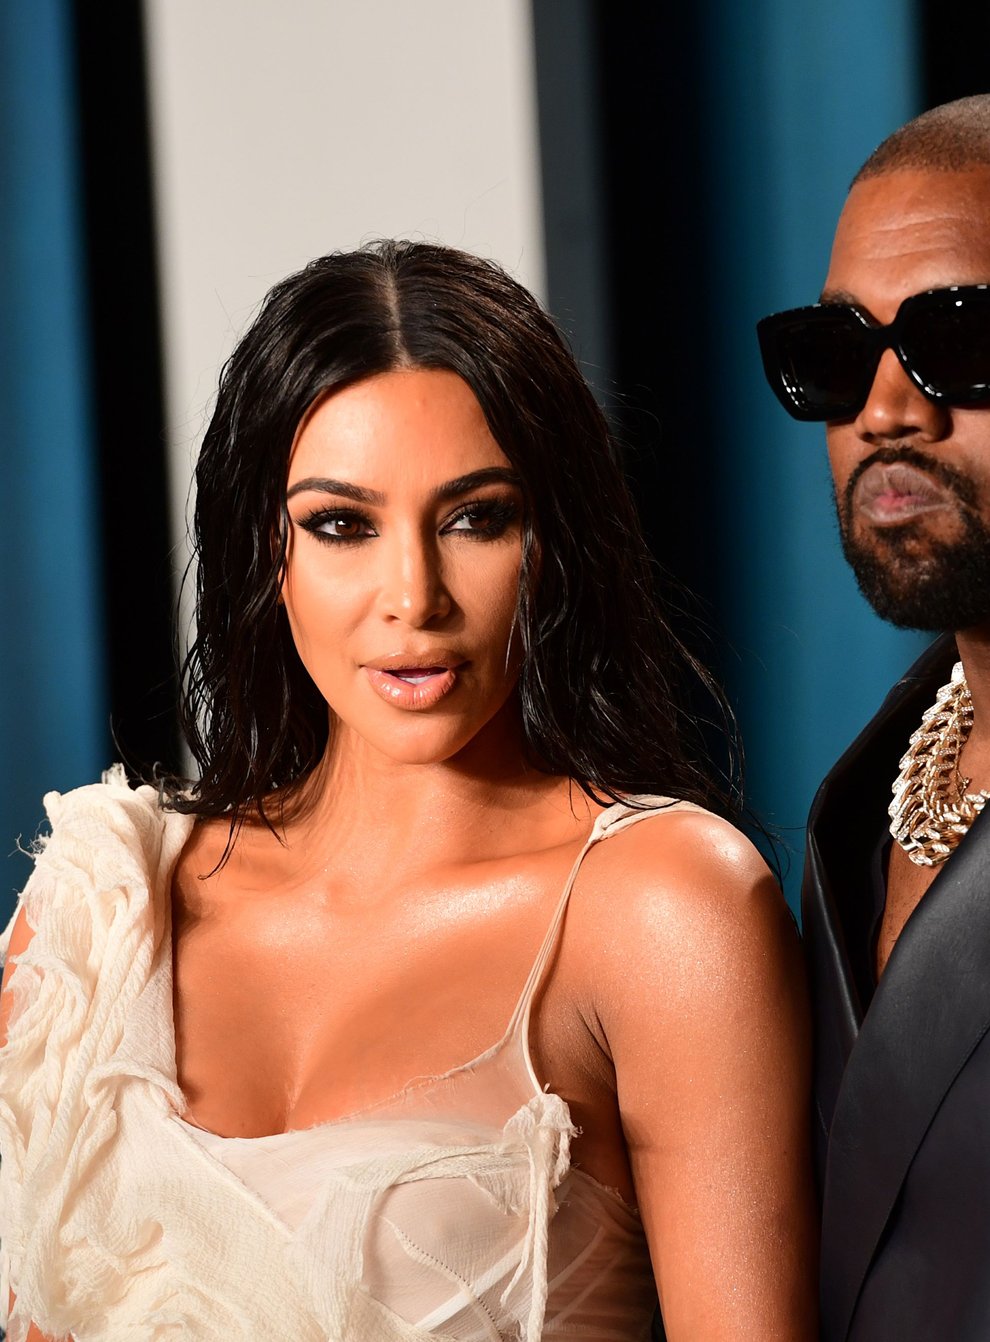 The man who would be President: Kanye West, who has declared he is running for the White House, with the support of his wife Kim Kardashian